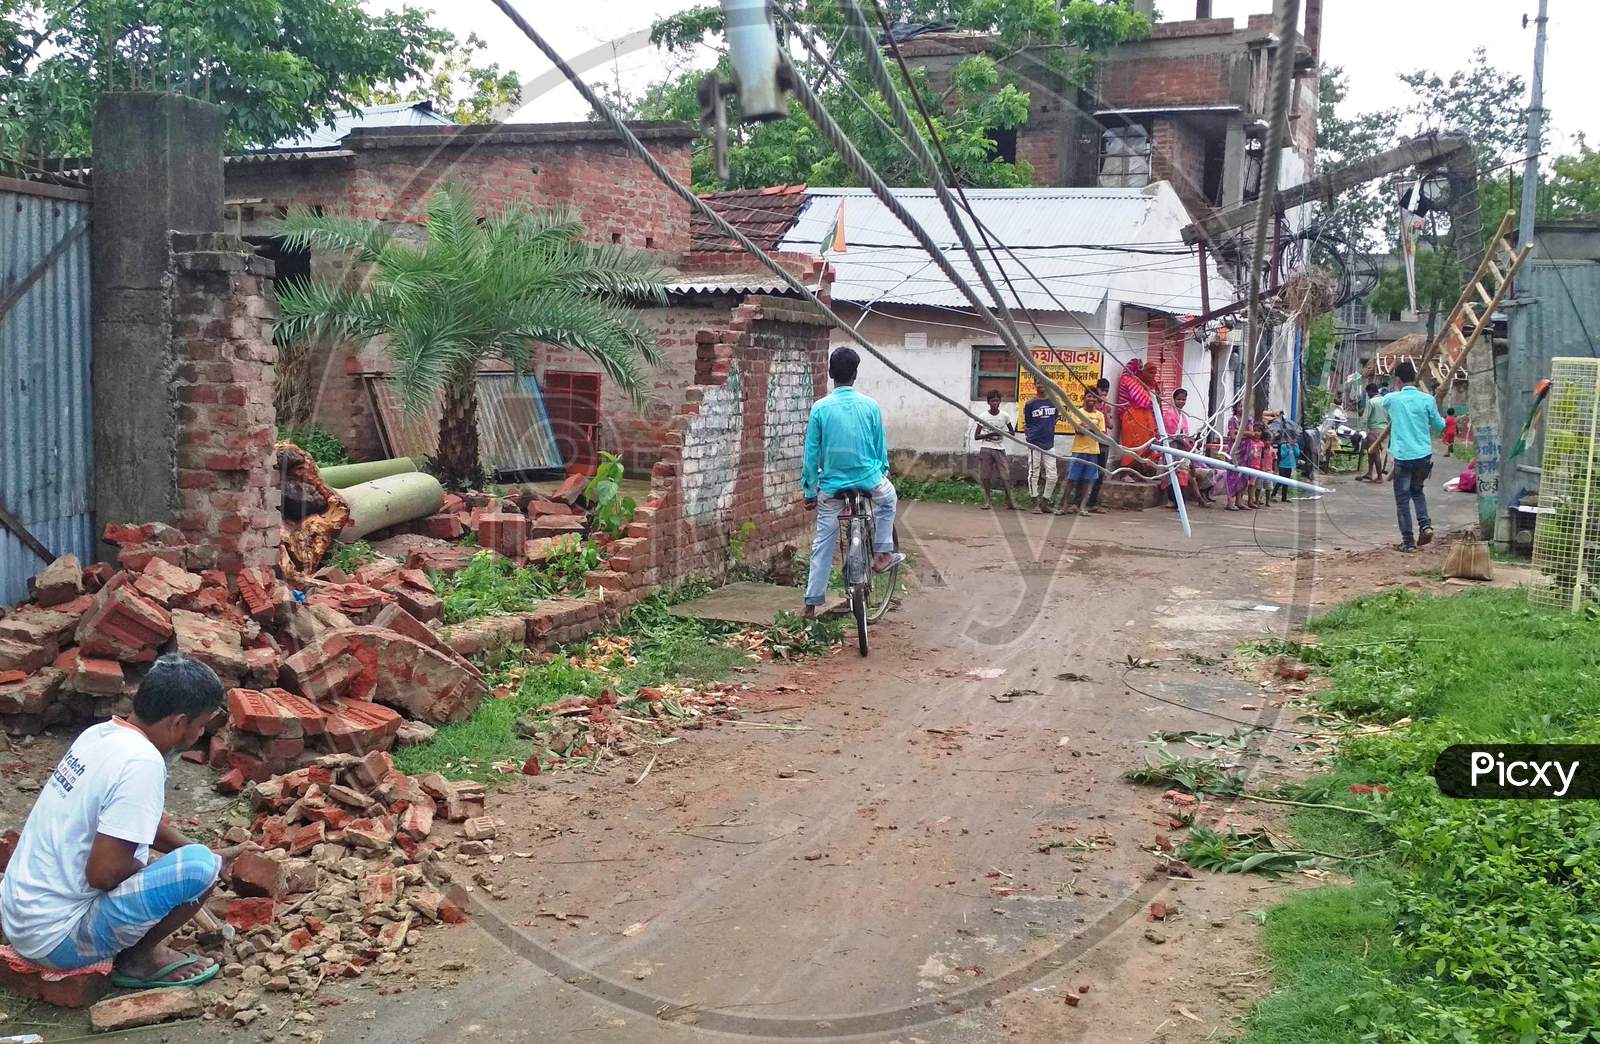 The electricity poles have broken during Cyclone Amphan in Burdwan town.